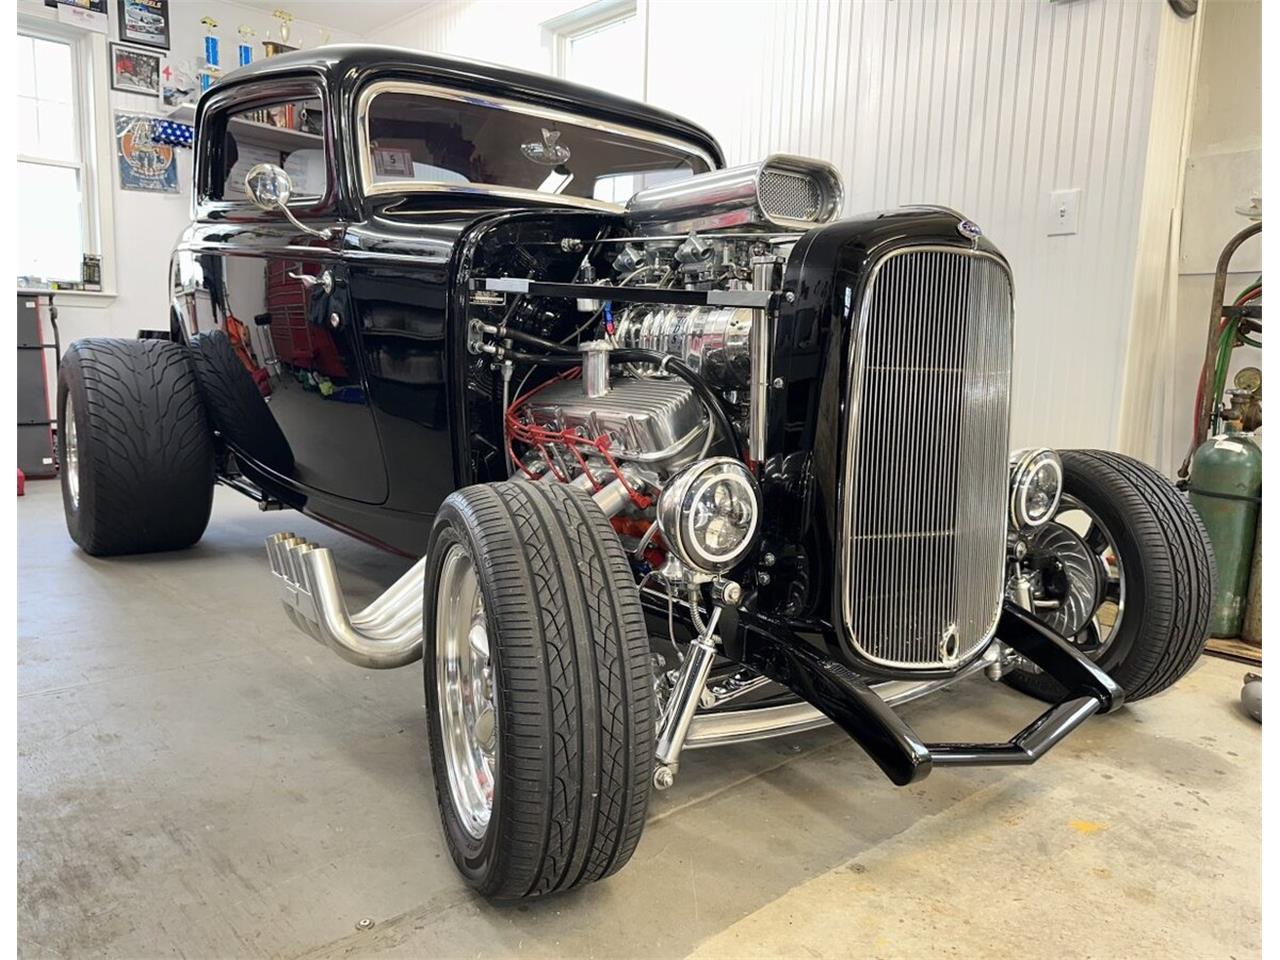 For Sale: 1932 Ford 3-Window Coupe in Lake Hiawatha, New Jersey for sale in Lake Hiawatha, NJ